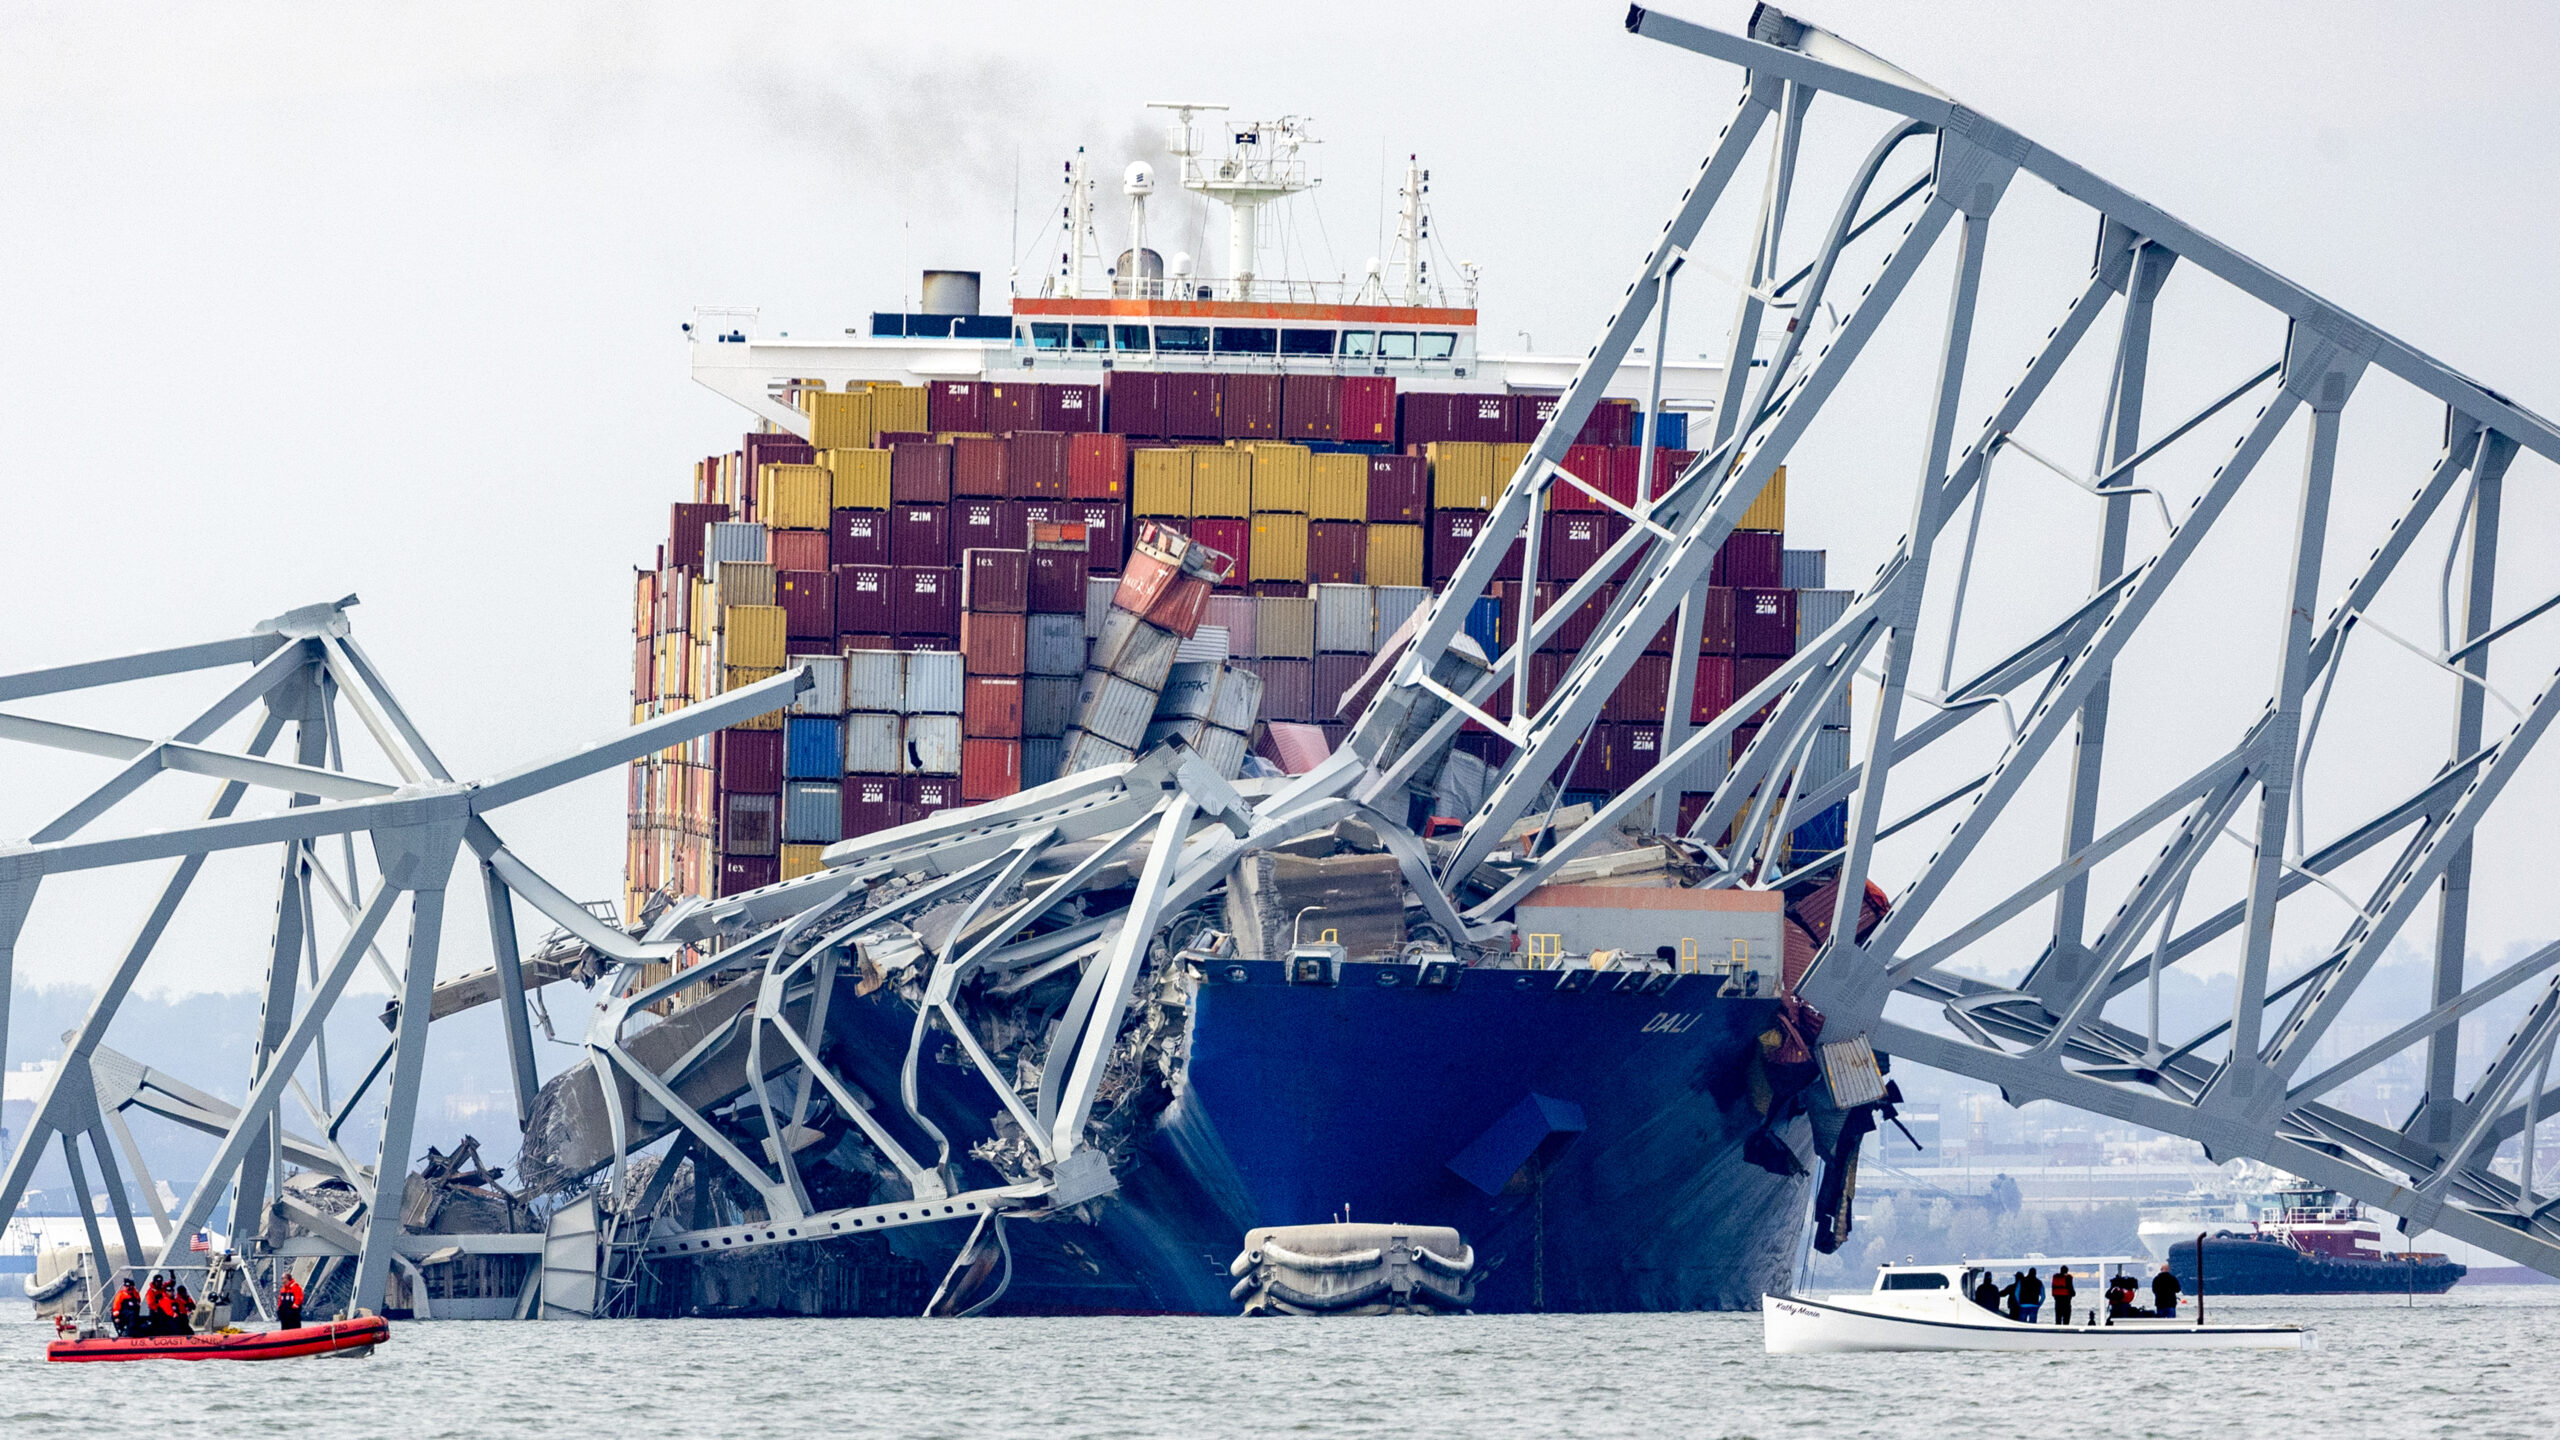 Federal investigators reveal that the ship involved in the Baltimore bridge collapse experienced two electrical blackouts the day before the tragic collision